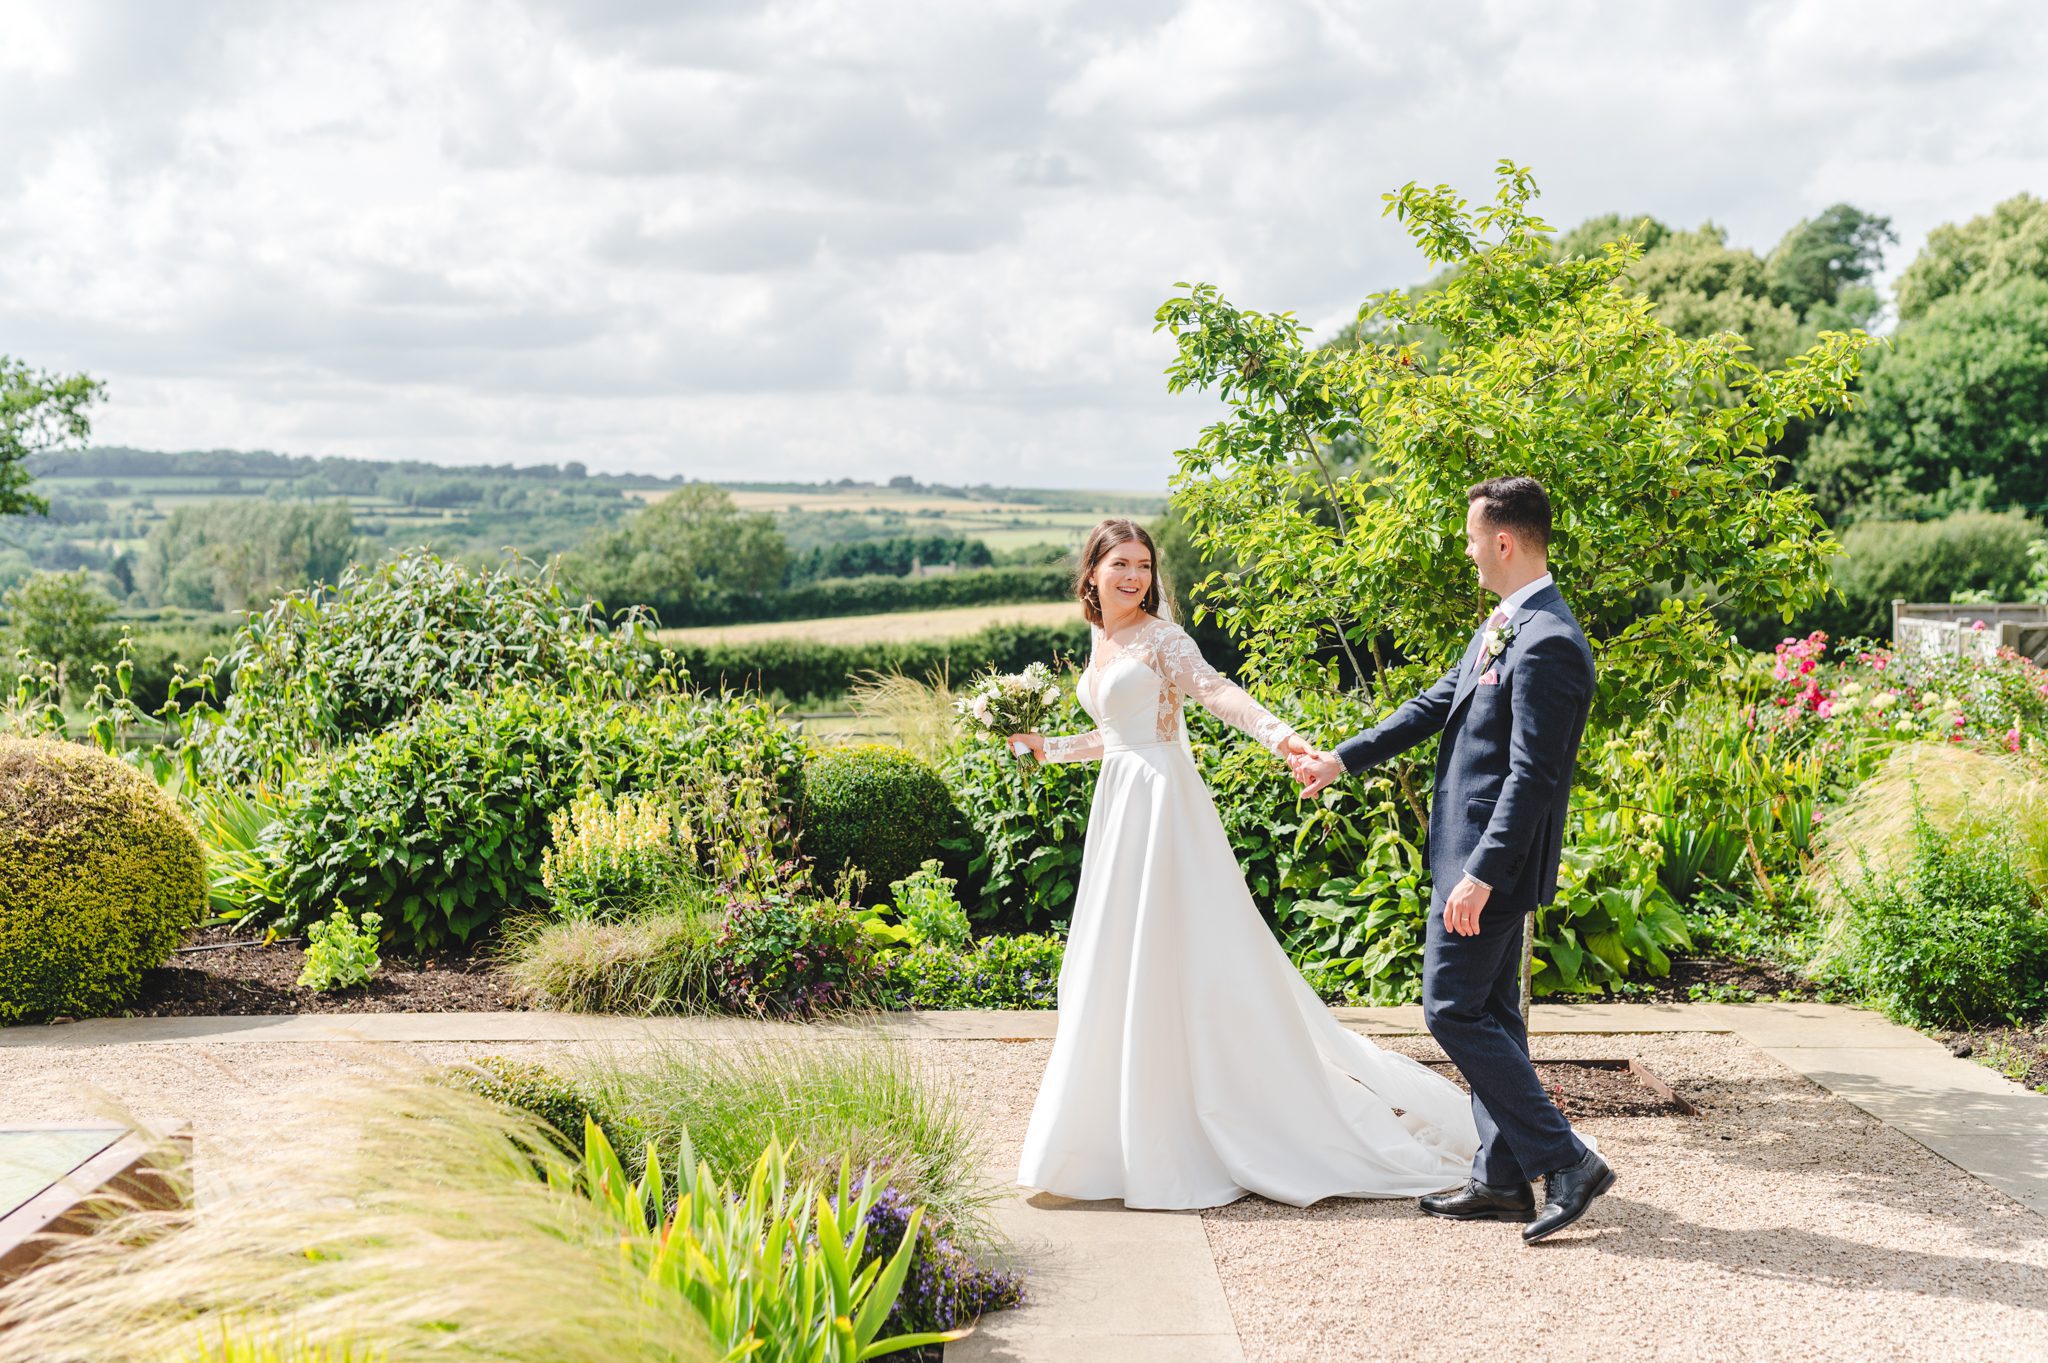 A bride and groom walking in The Cotswolds